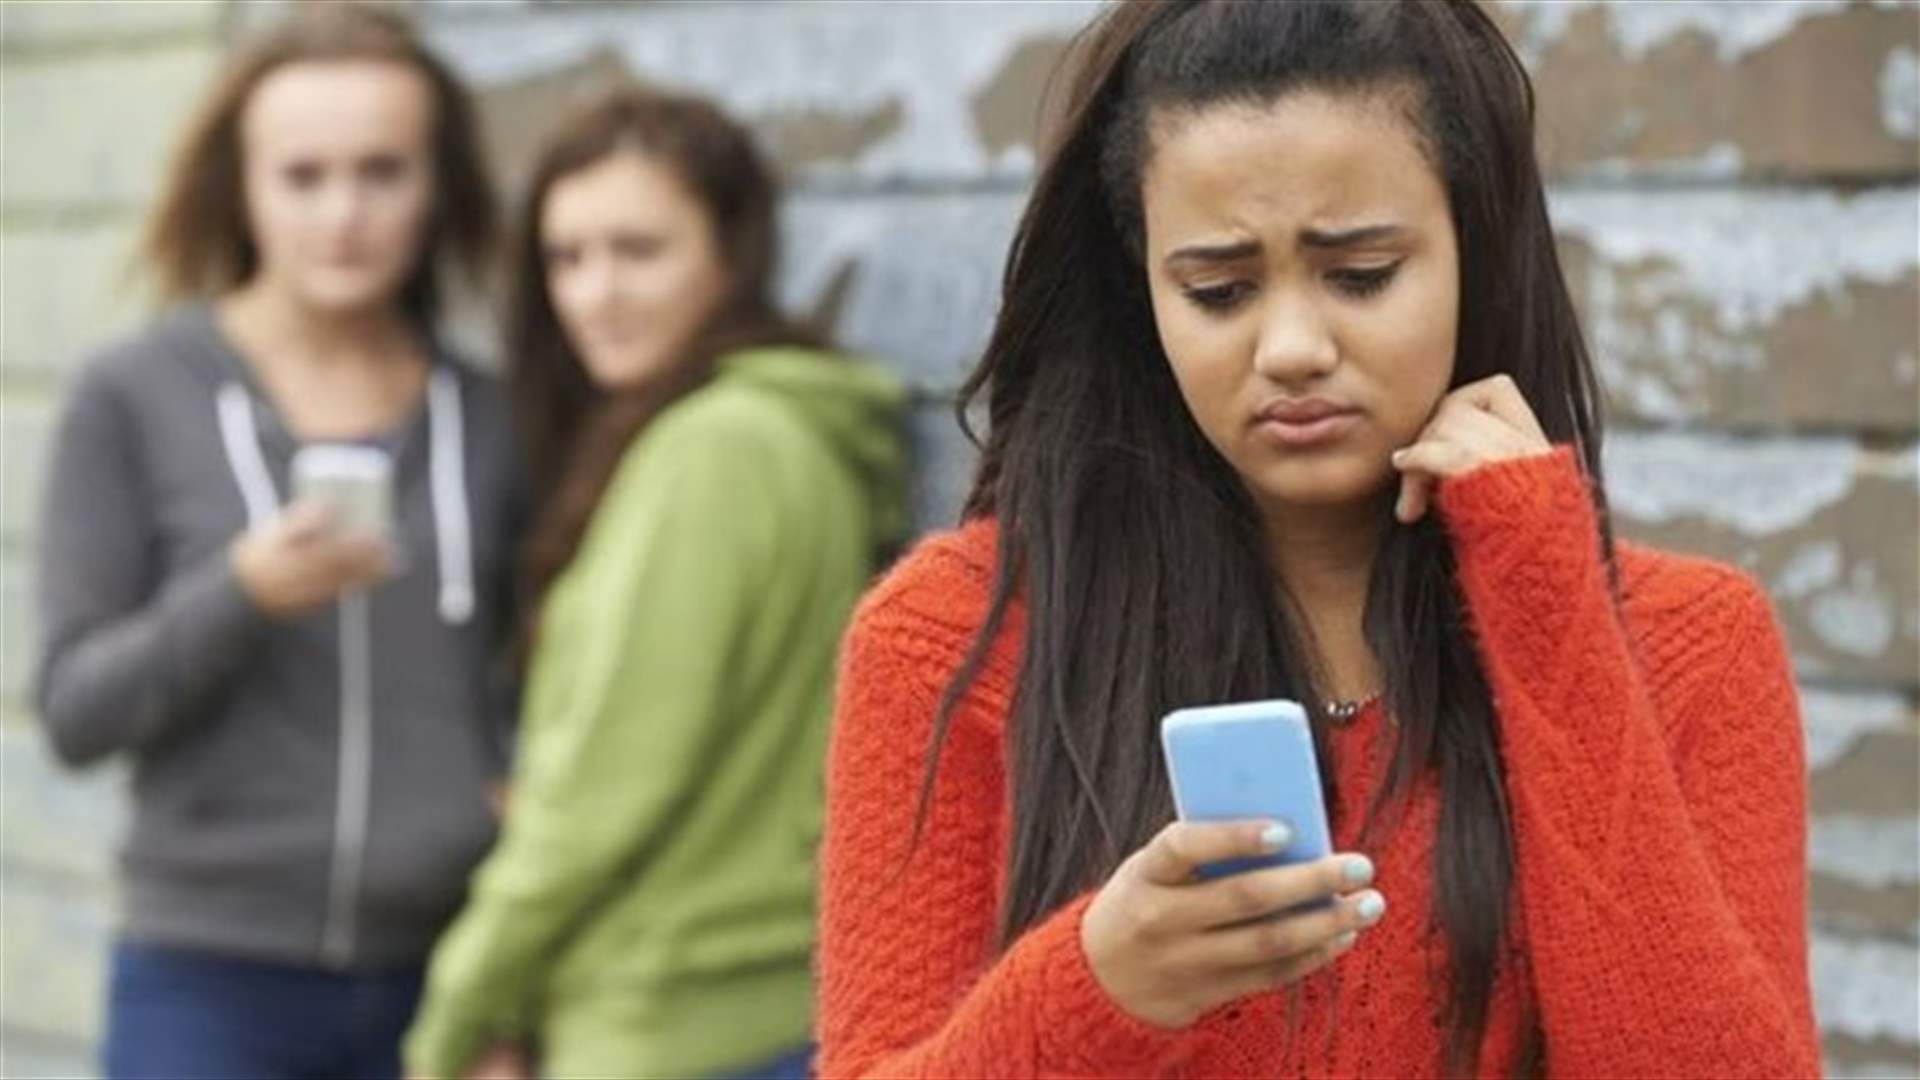 Instagram Worst App For Cyber-Bullying, Study Says